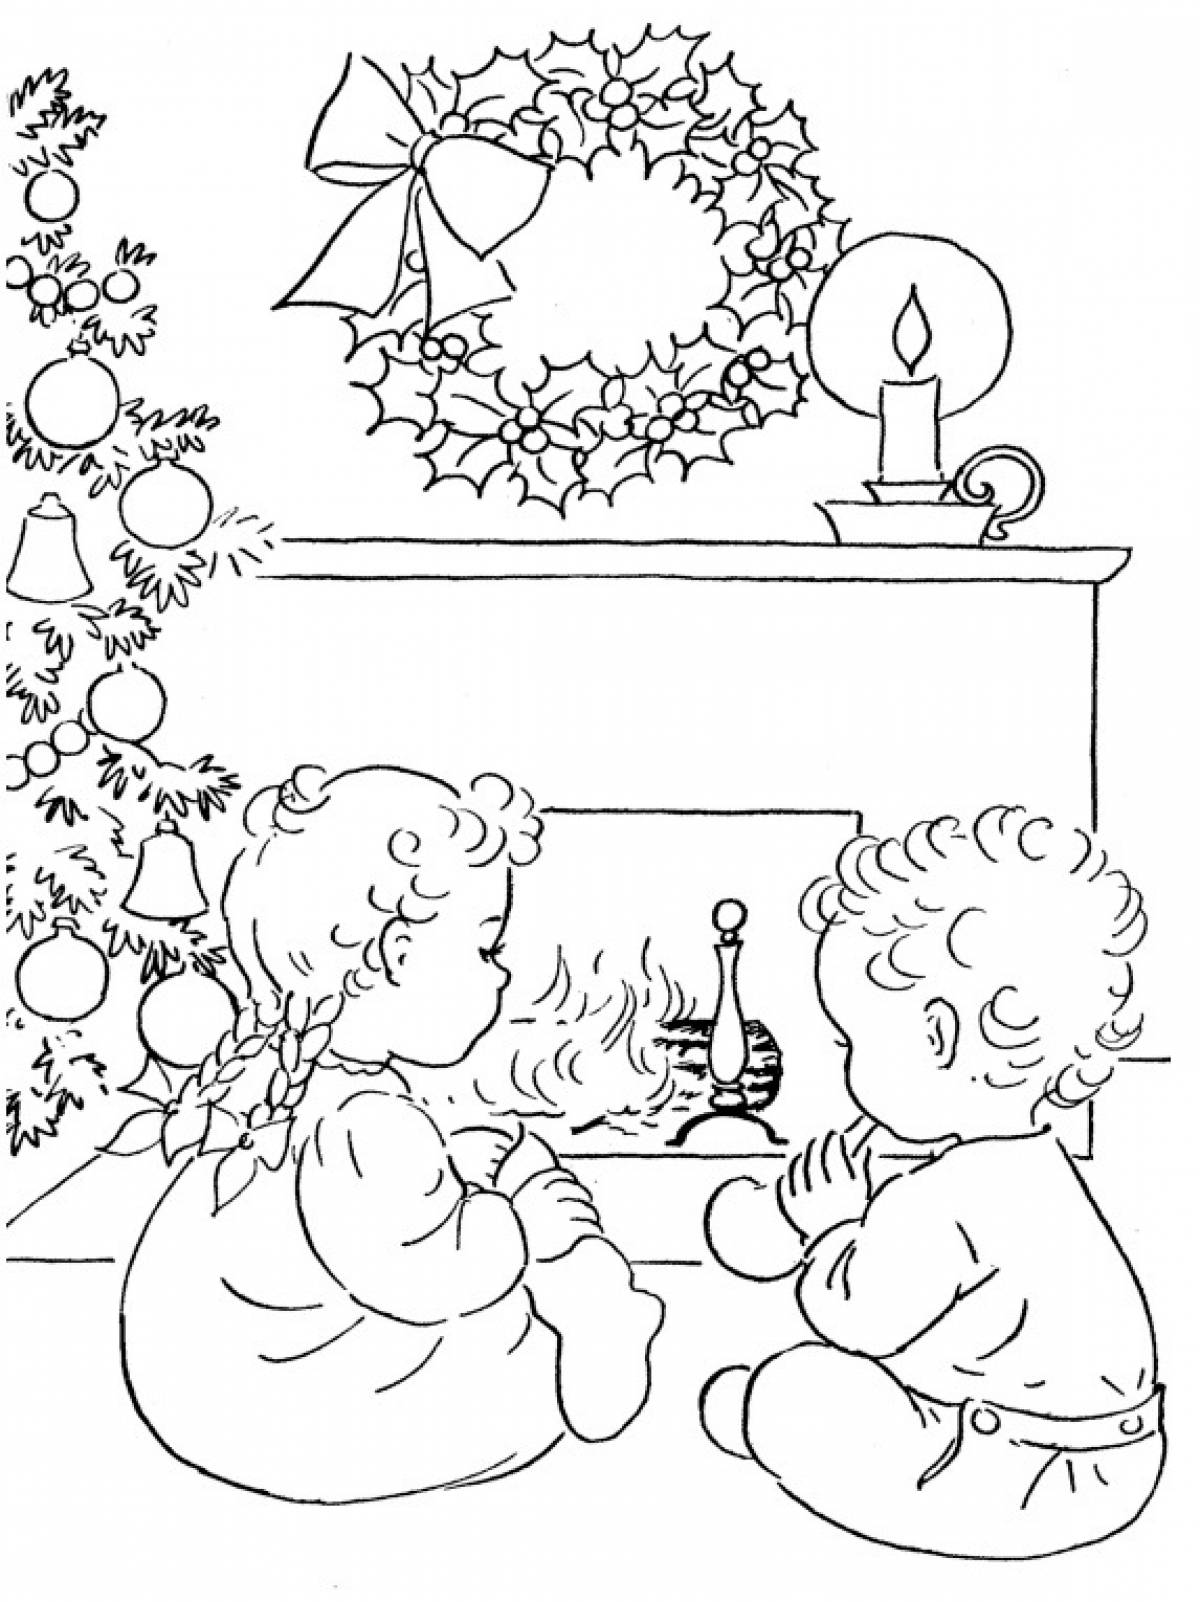 Children by the fireplace